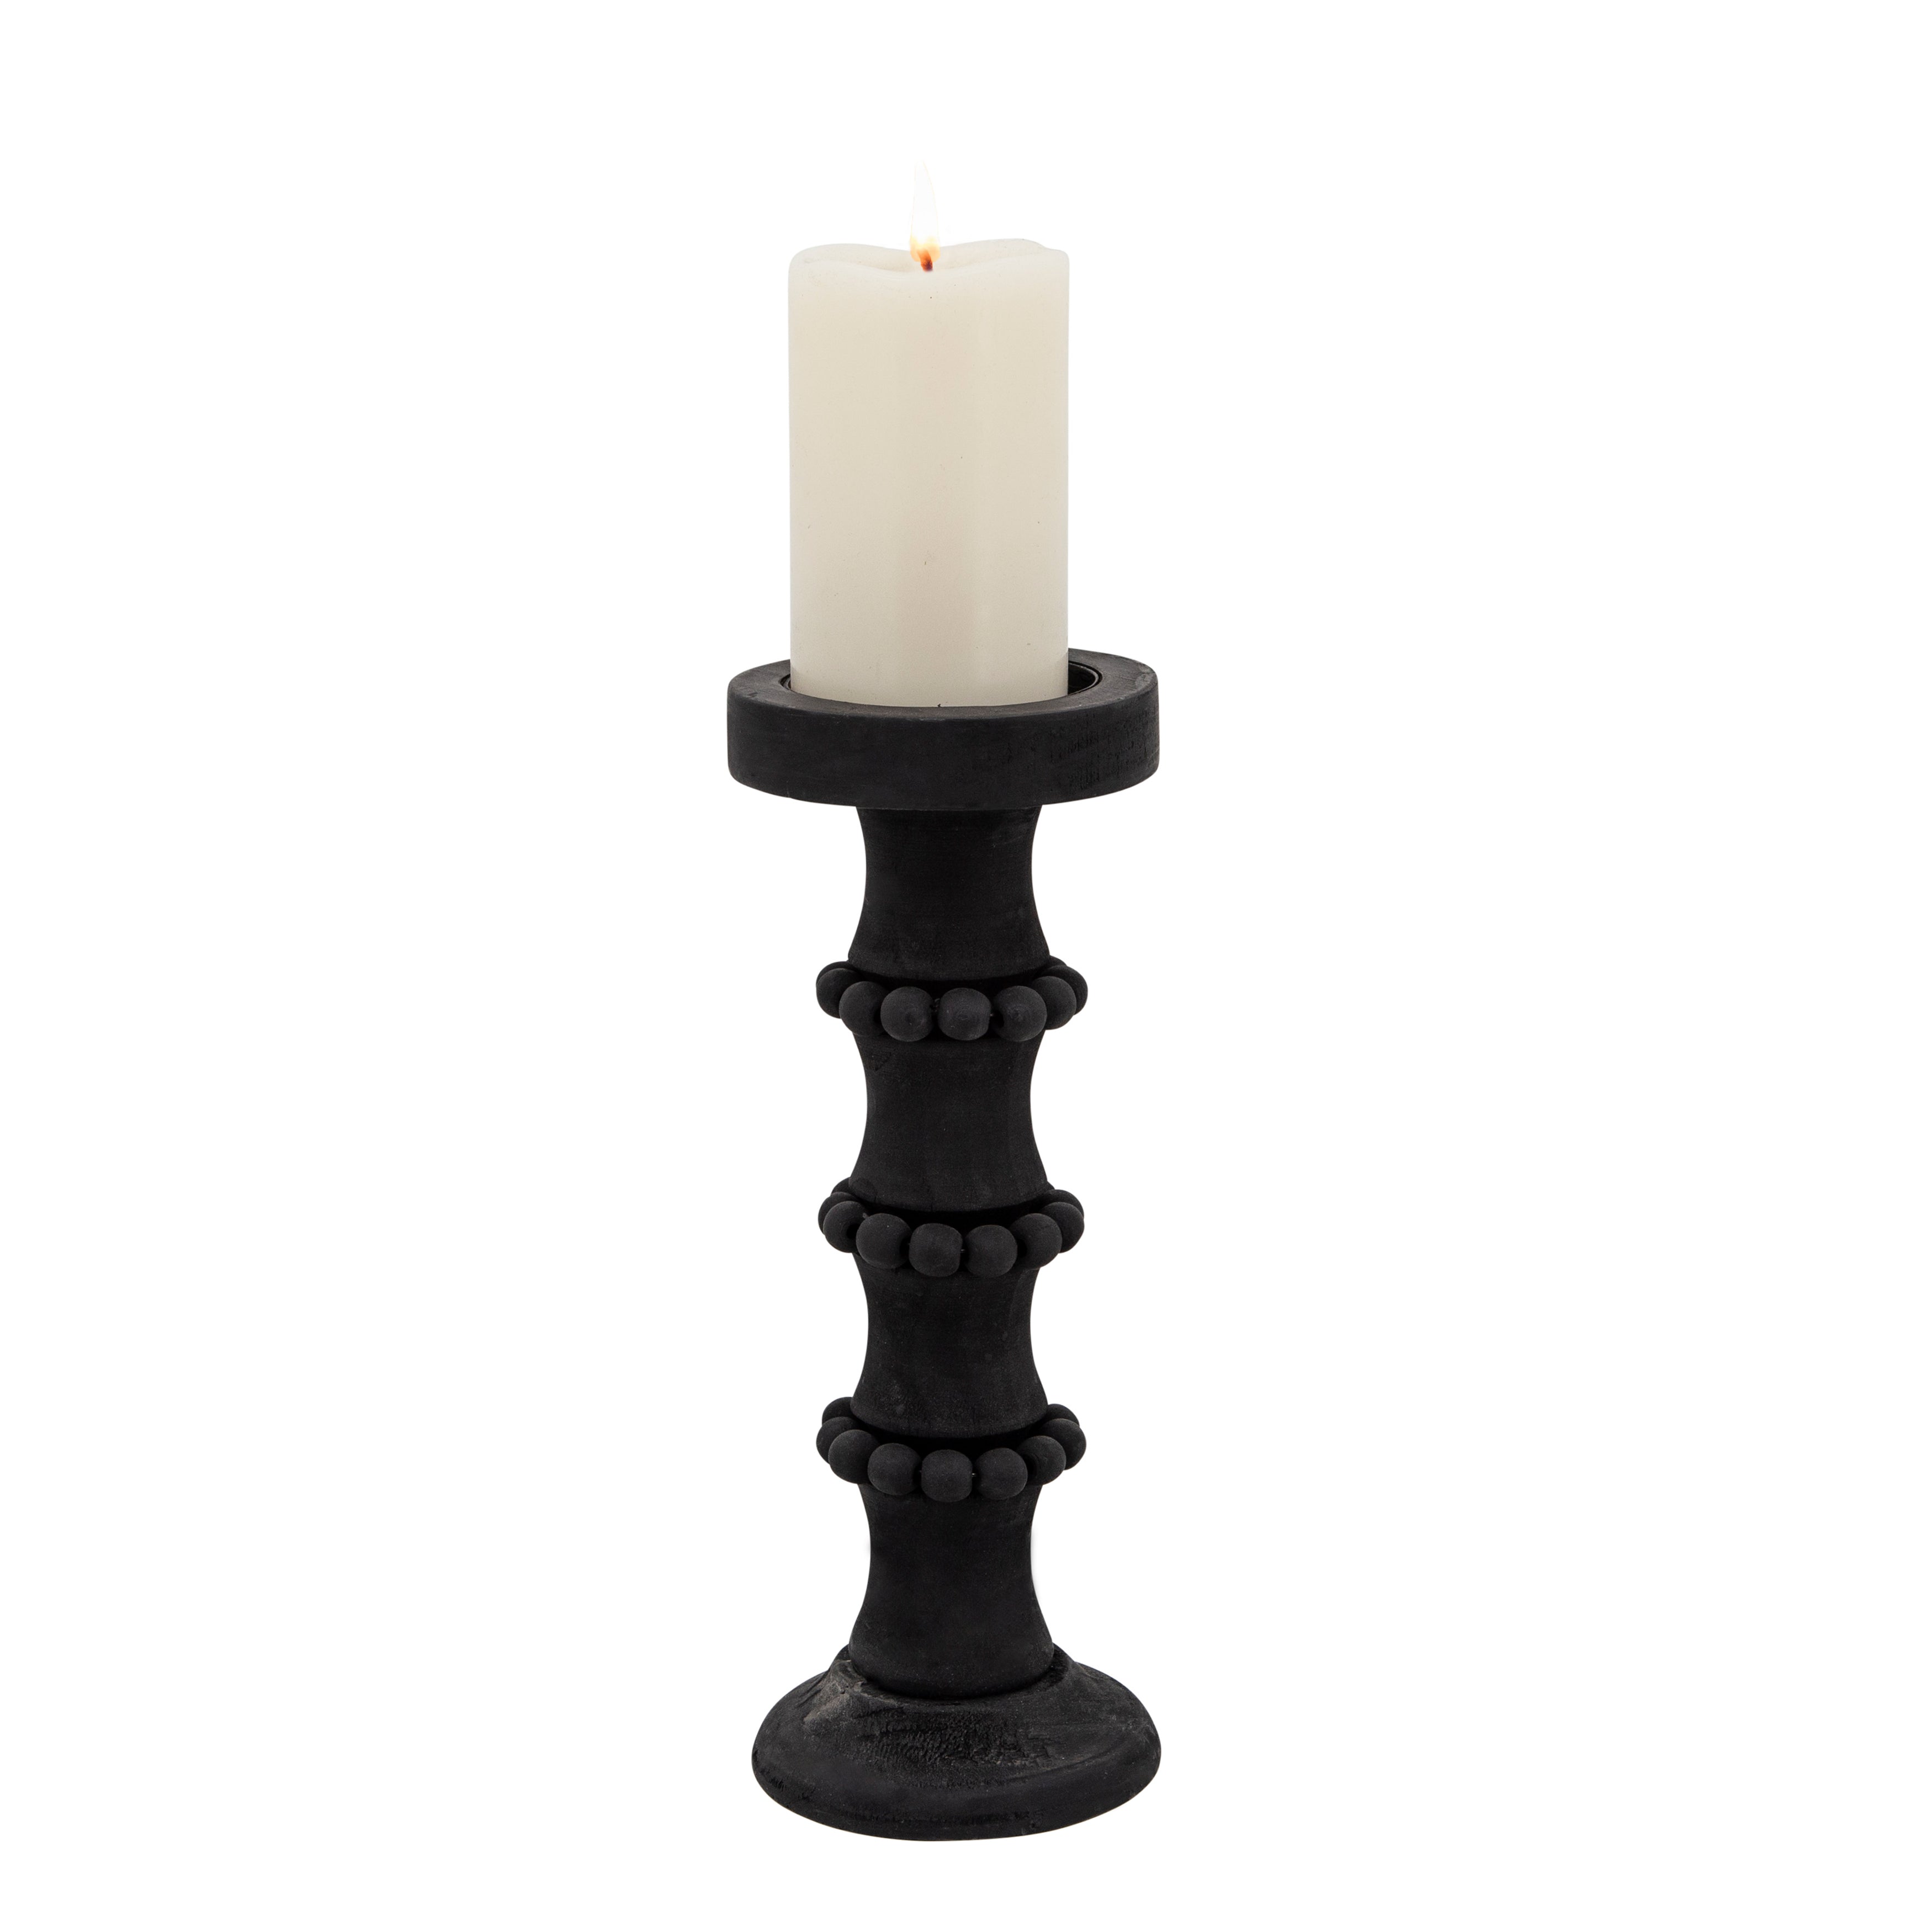 Wood, 13" Antique Style Candle Holder, Black, Candle Holders and Tealights